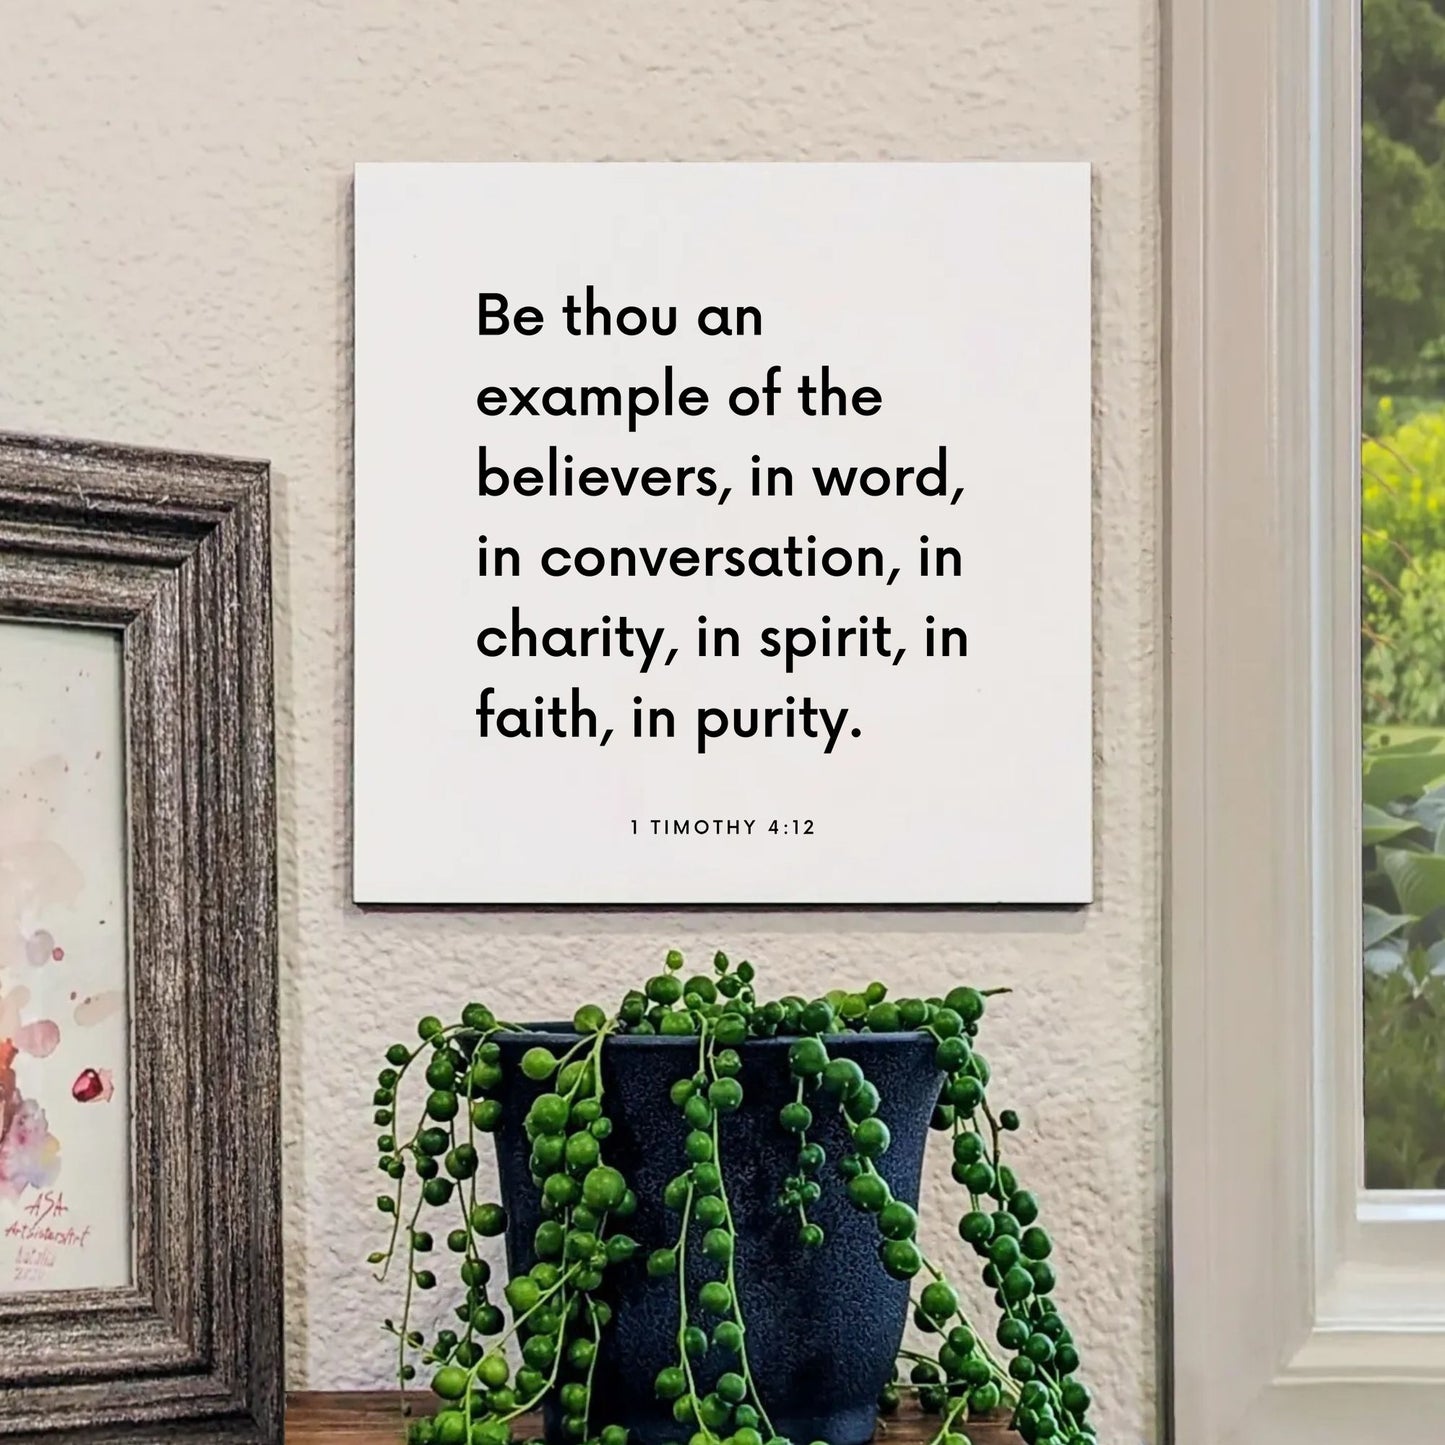 Window mouting of the scripture tile for 1 Timothy 4:12 - "Be thou an example of the believers"